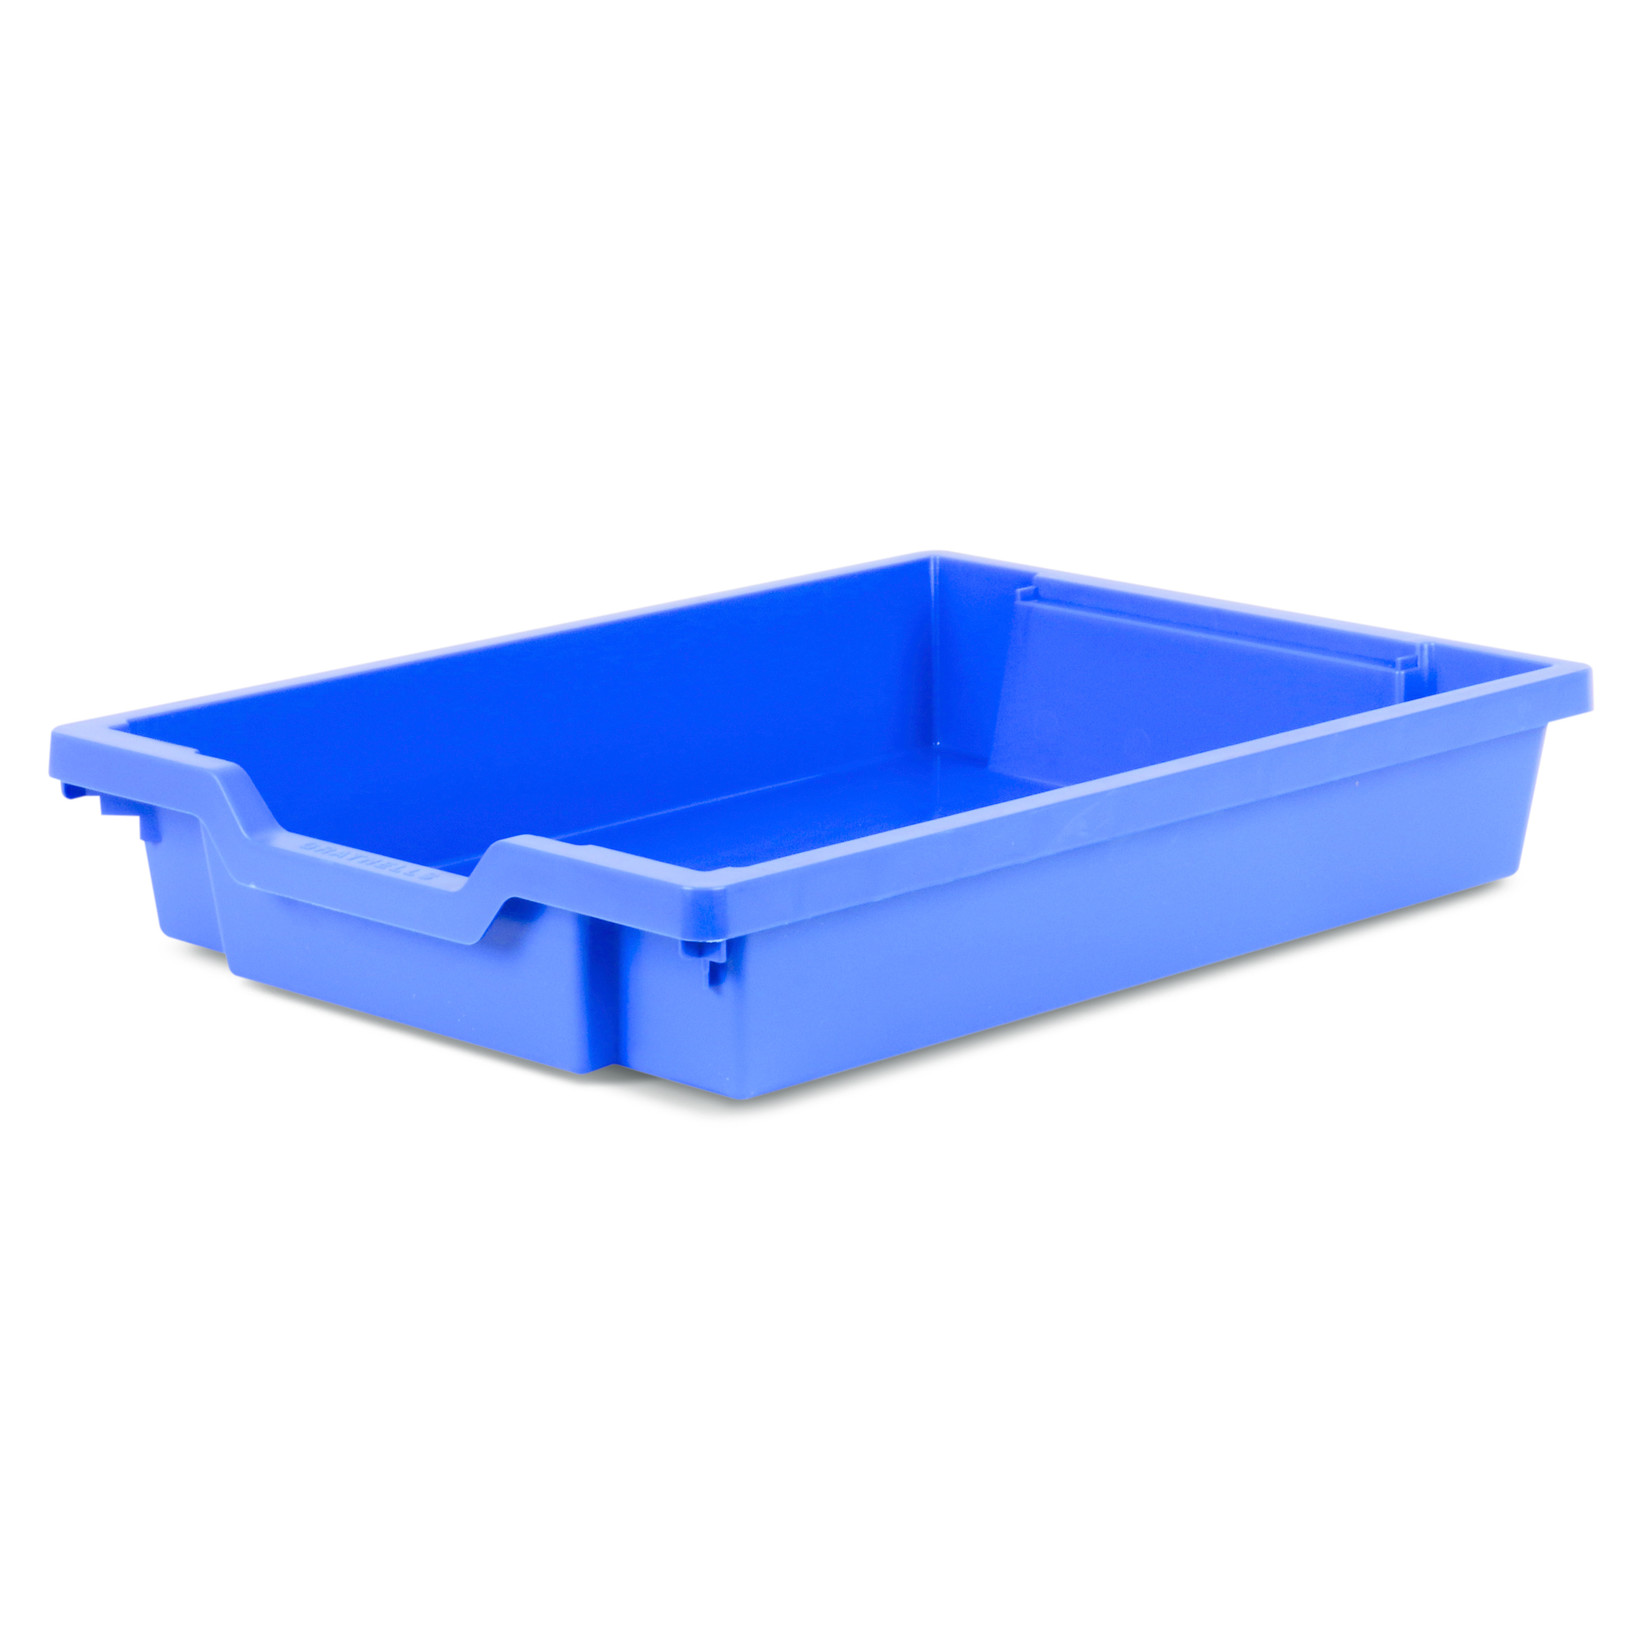 Gratnells Shallow F1 Tray Royal Blue